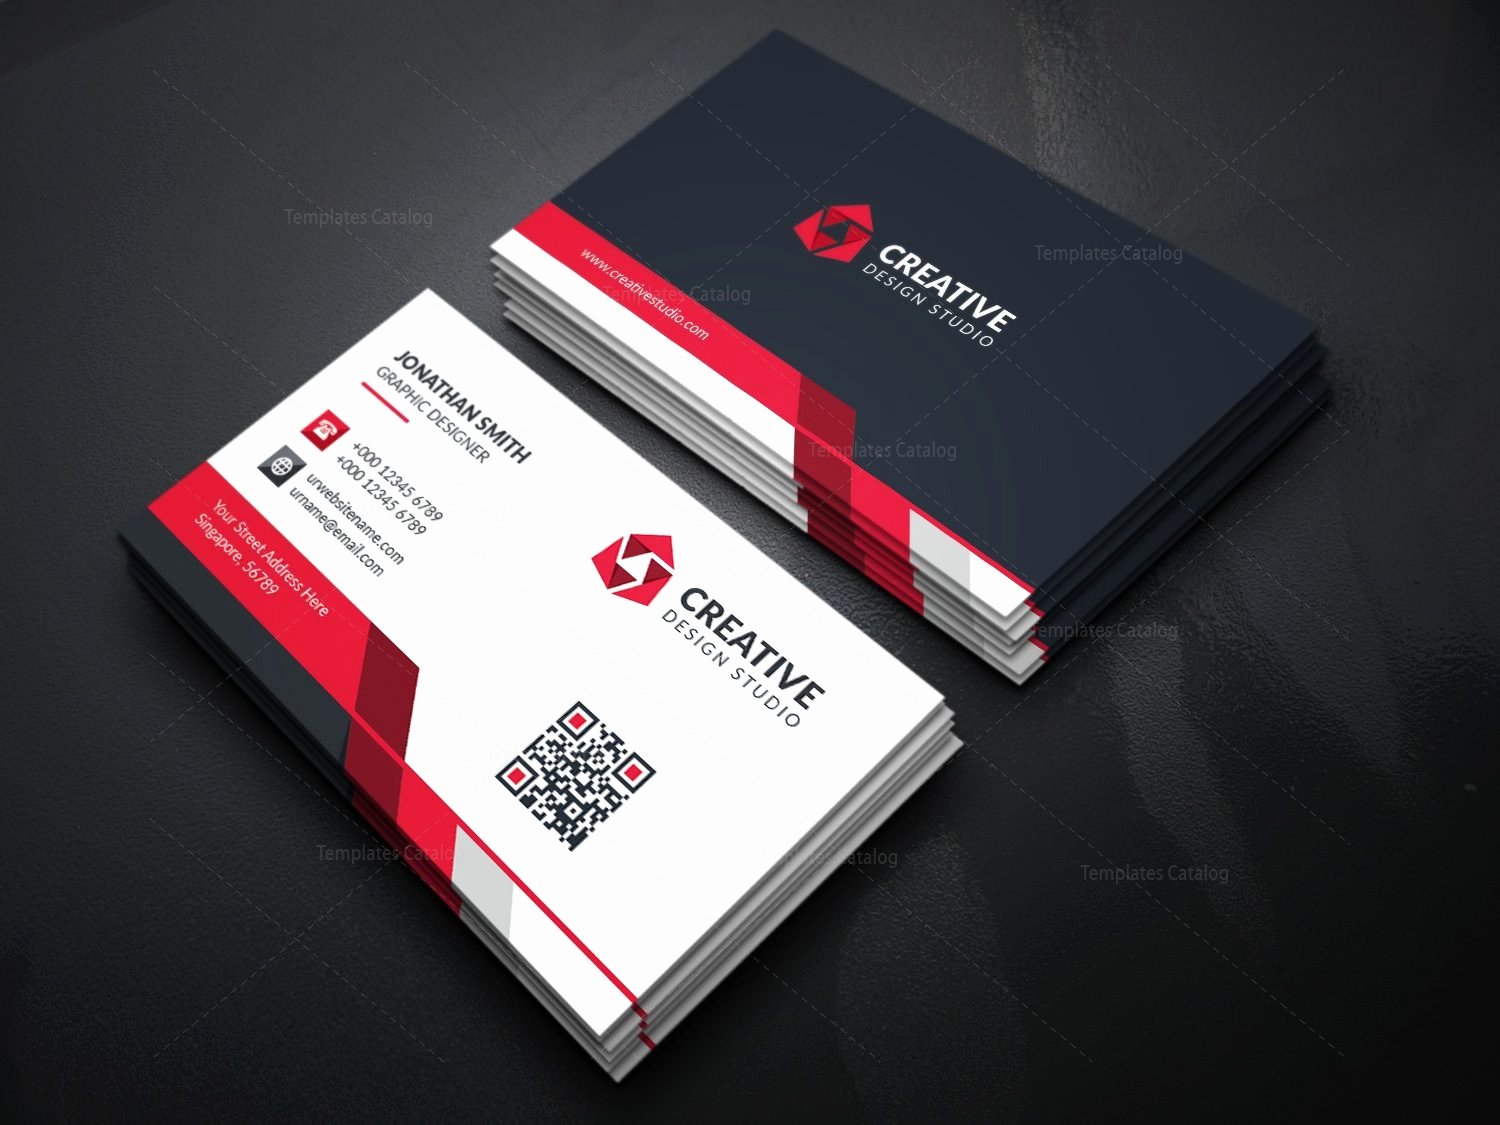 Modern Business Card Template with Creative Design